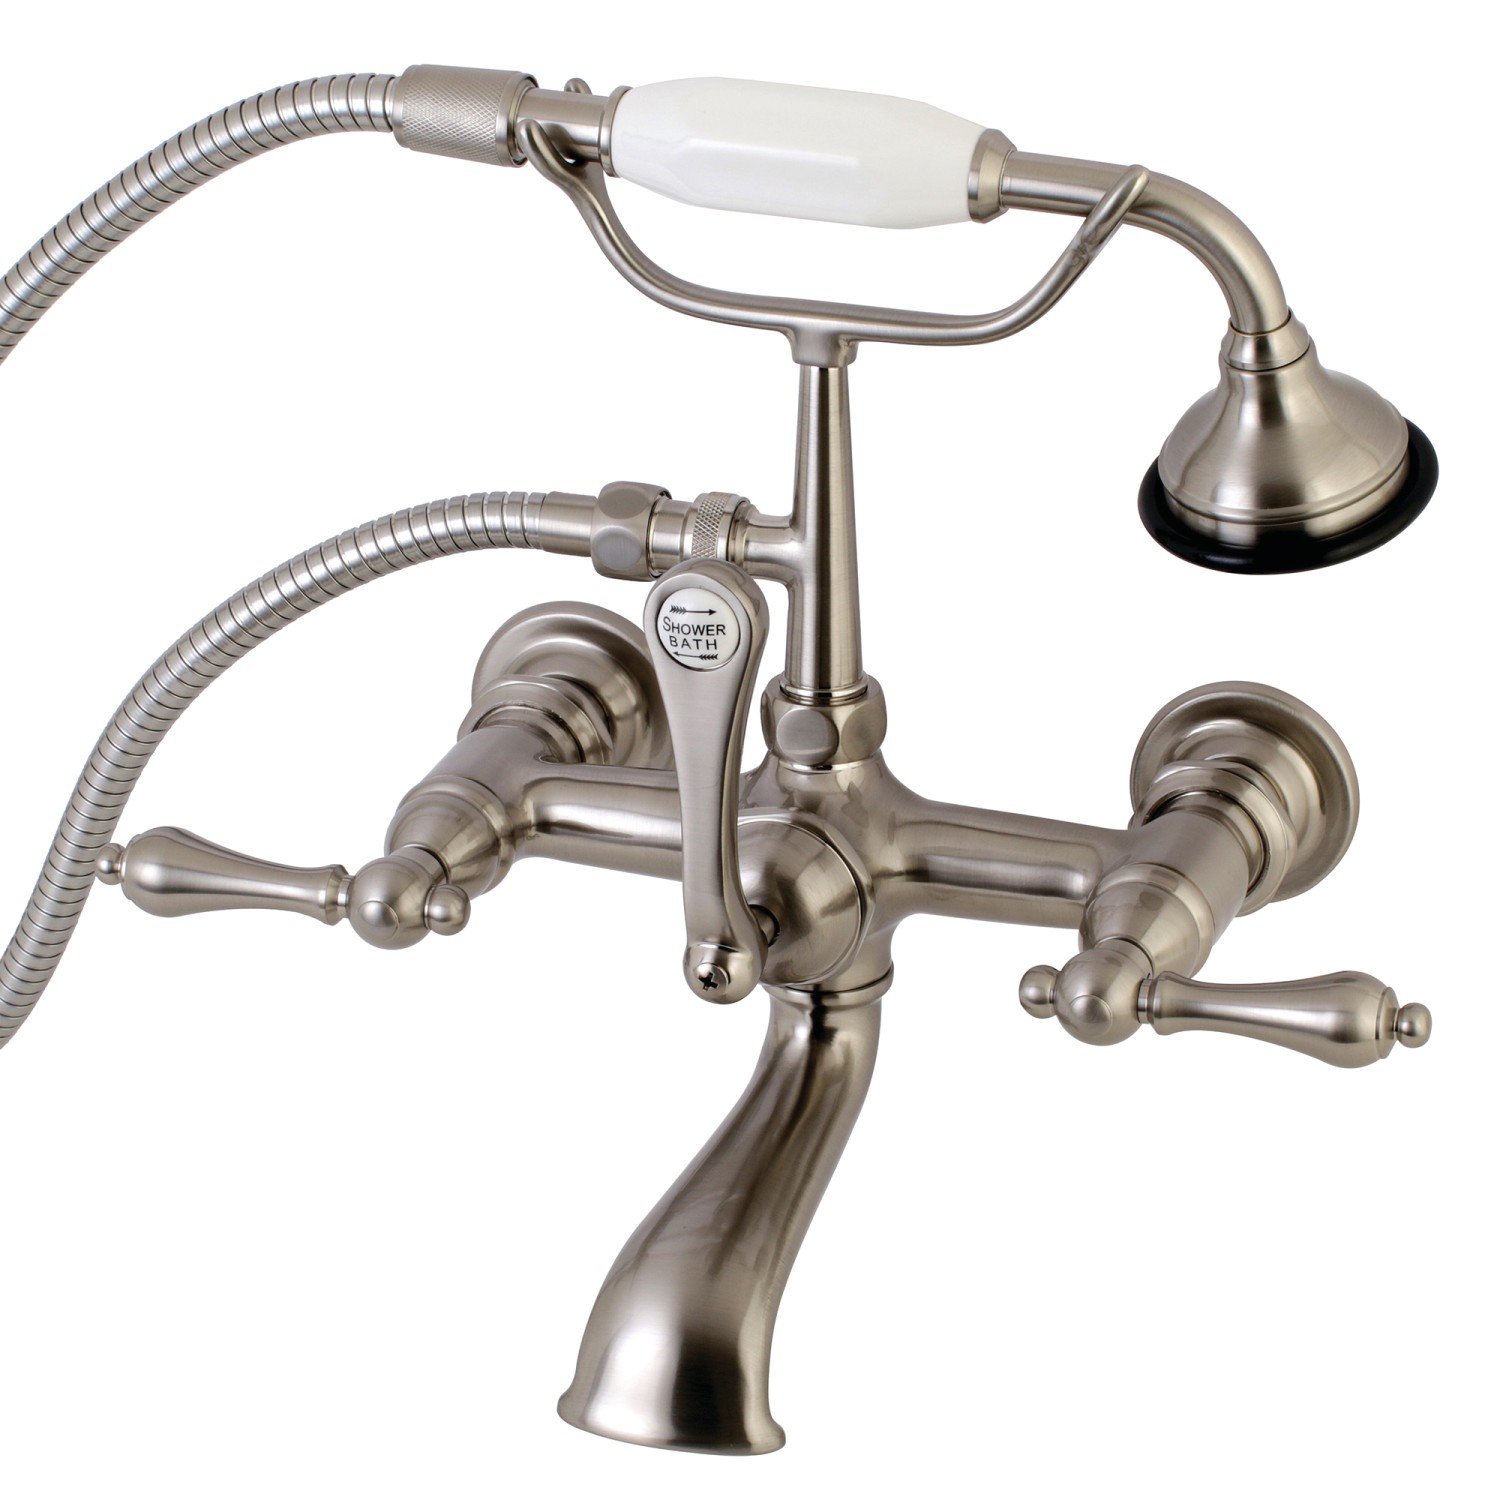 KINGSTON BRASS AE551T VINTAGE WALL MOUNT CLAWFOOT TUB FAUCET WITH HAND SHOWER